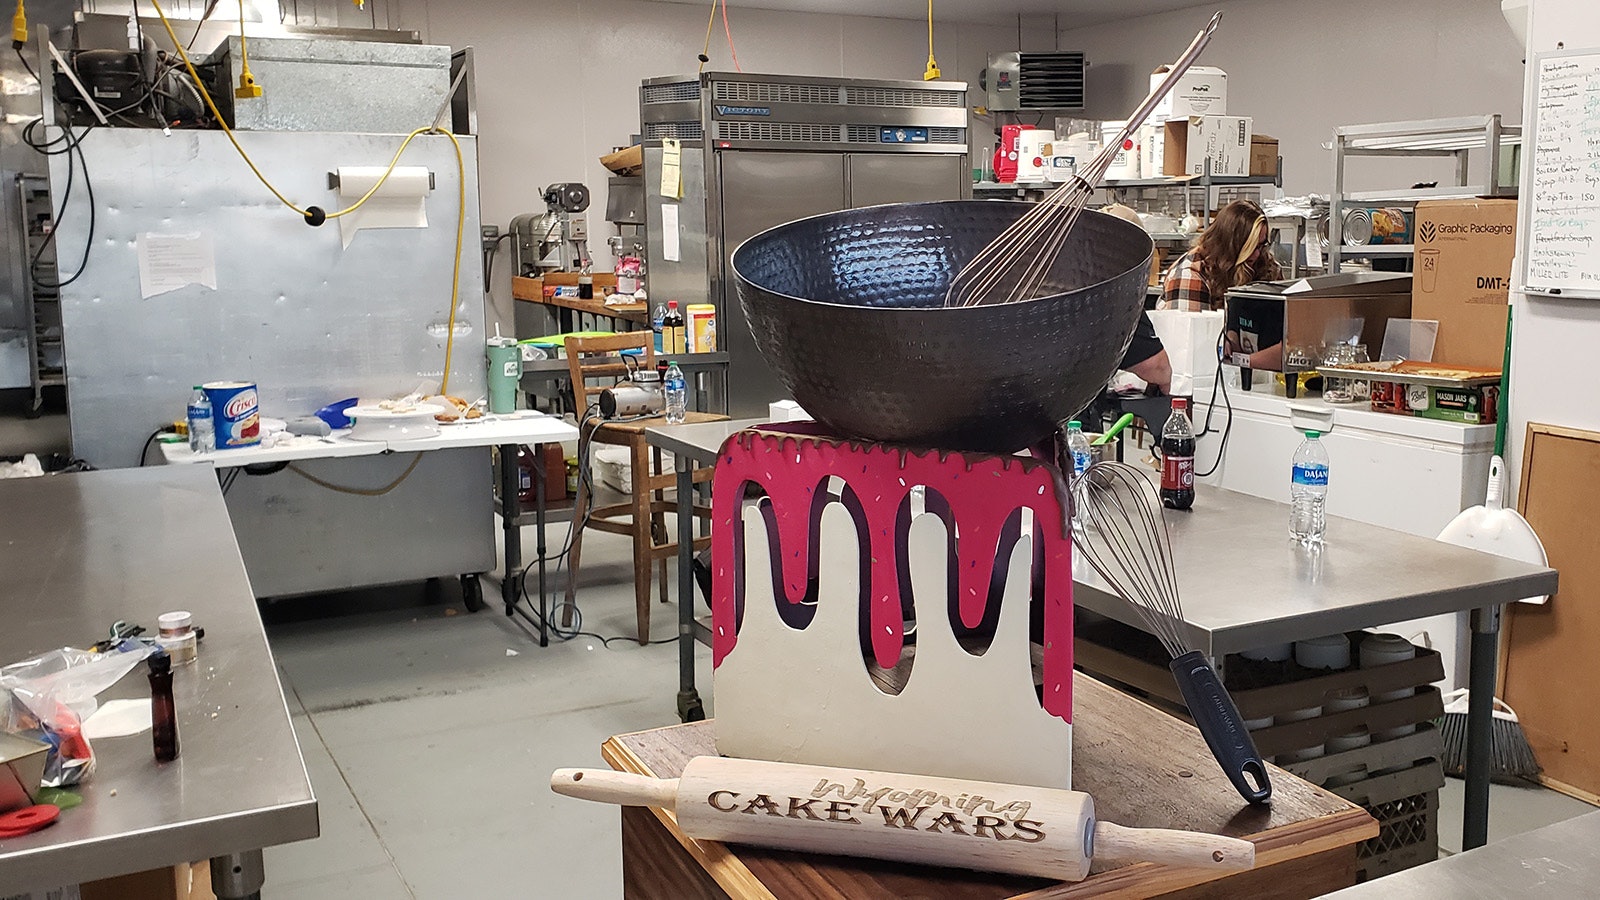 An epic cake competition needs an epic trophy. This one was made by the woodworking and welding classes at Carbon County Higher Education Center. The whisk actually spins around in the mixing bowl on top of a cake slice made by welding students.